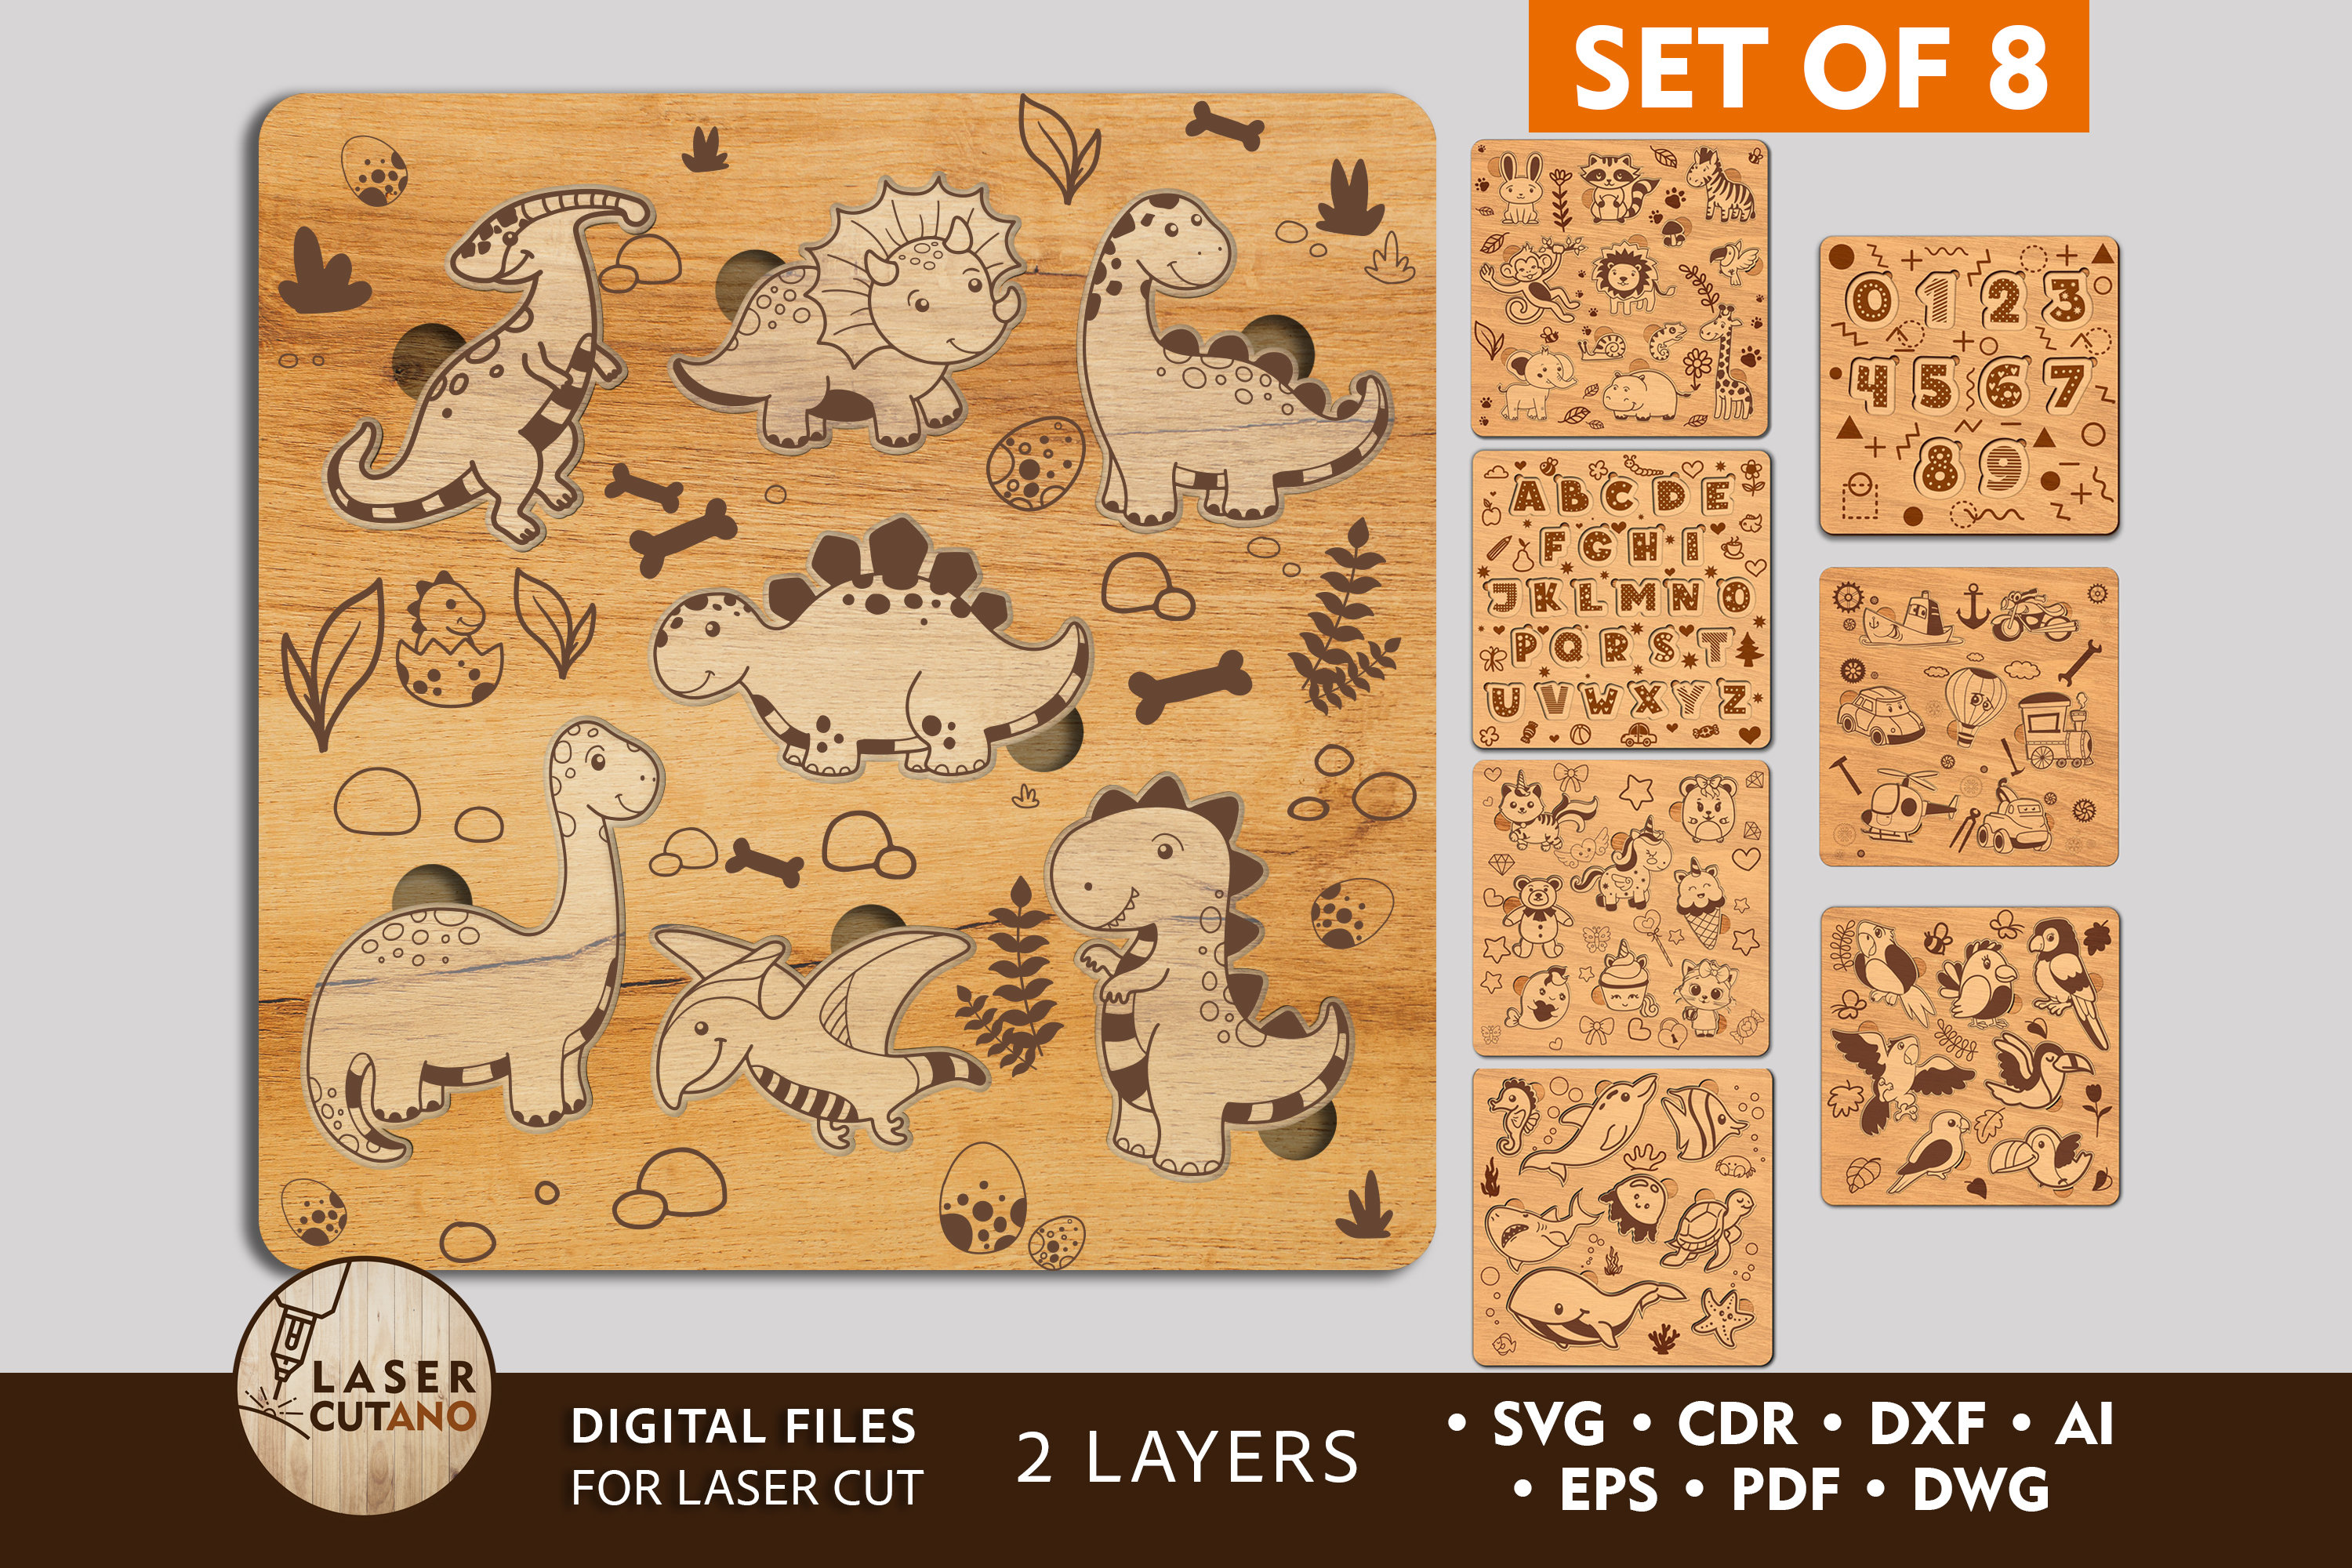 Jigsaw Puzzle Template 7x10 pieces for kids ai, dxf, svg cut files